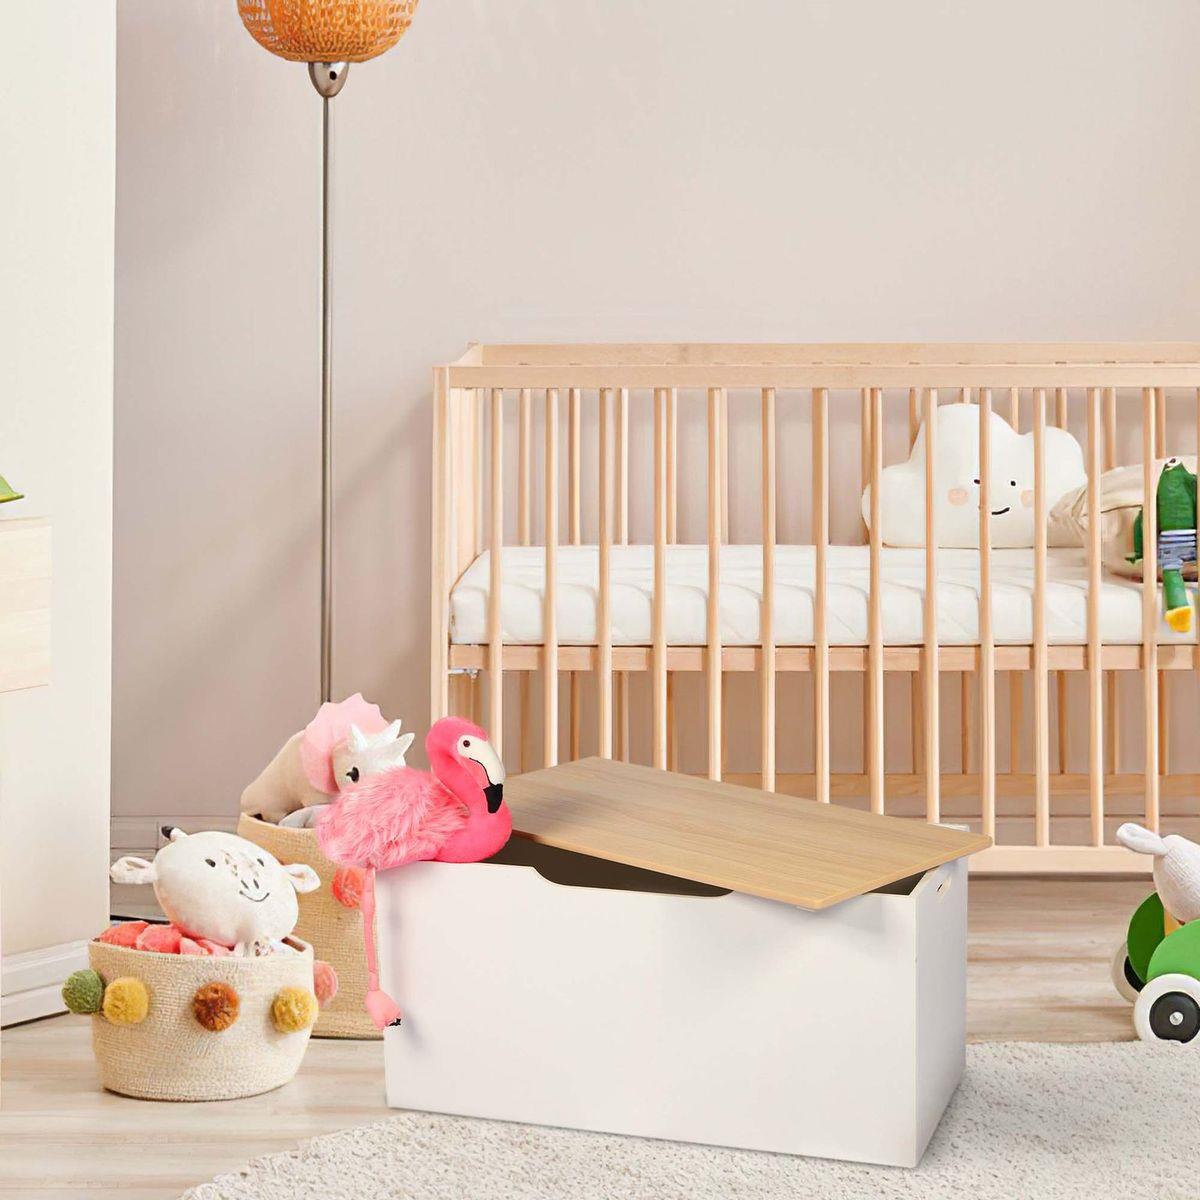 White Wooden Storage Chest For Kids Toys And Blankets